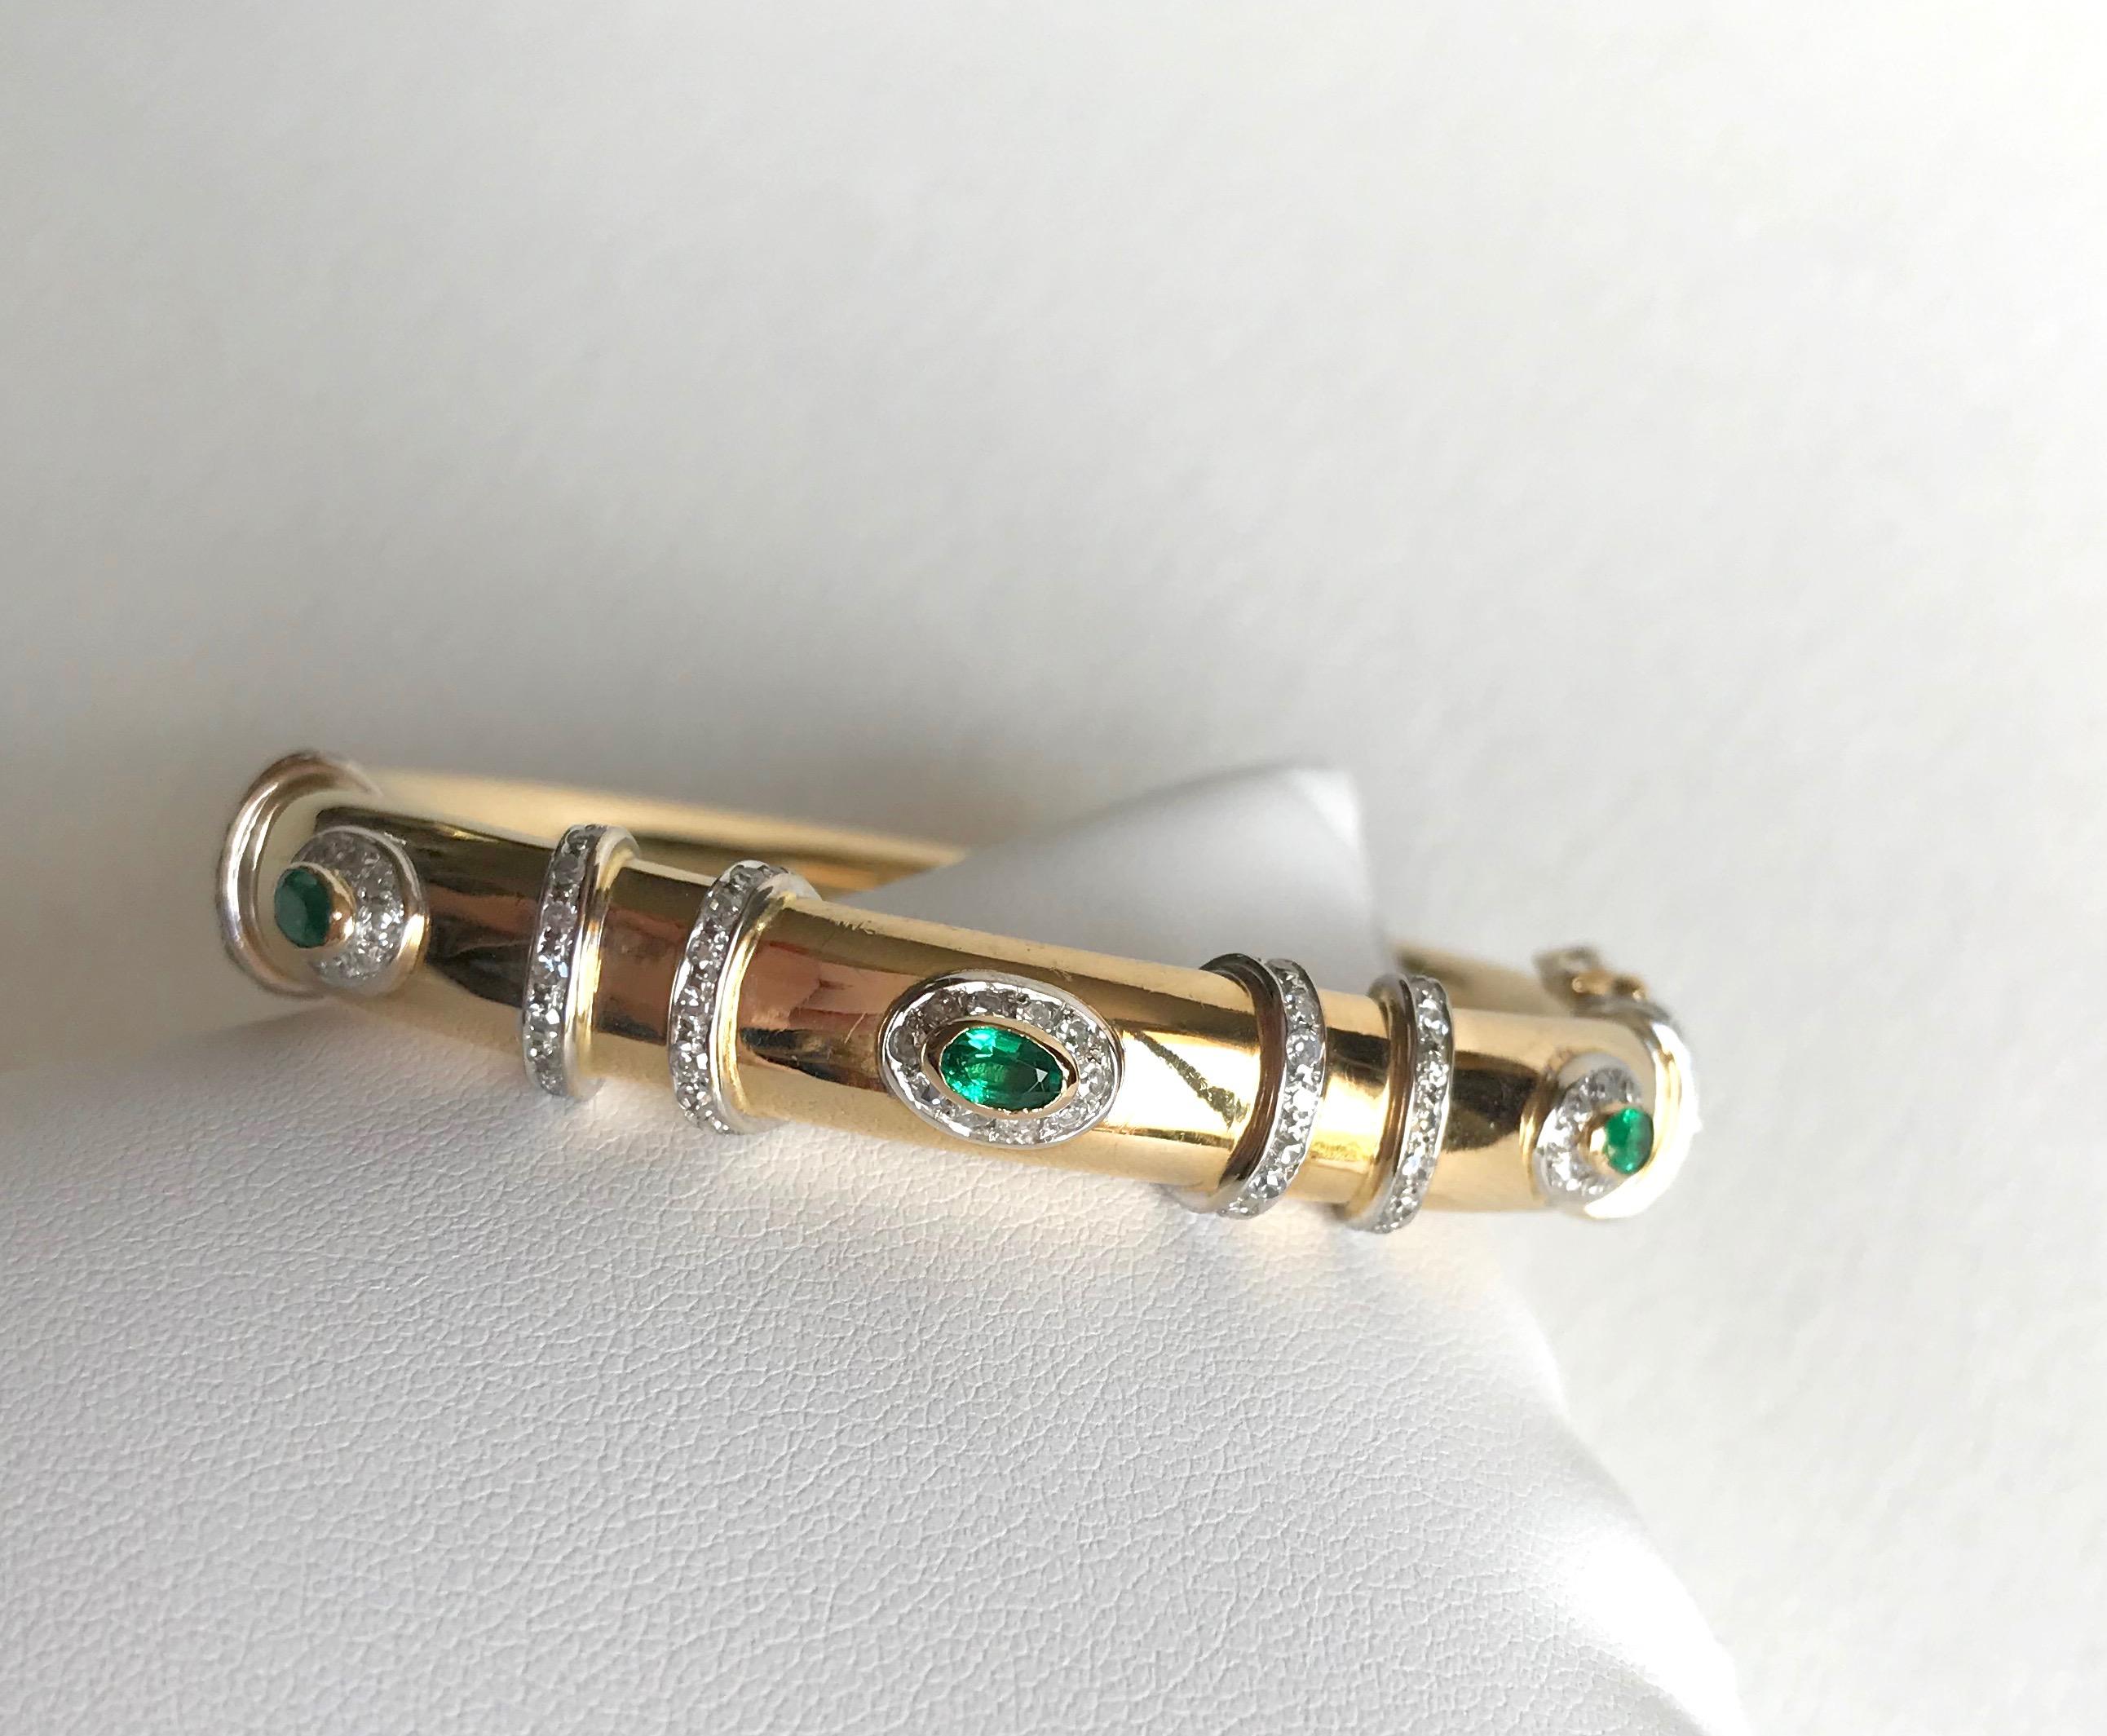 Emerald Cut Cartier Rigid Emerald Bracelet 1960 in Yellow and White Gold 18 kt and Diamonds